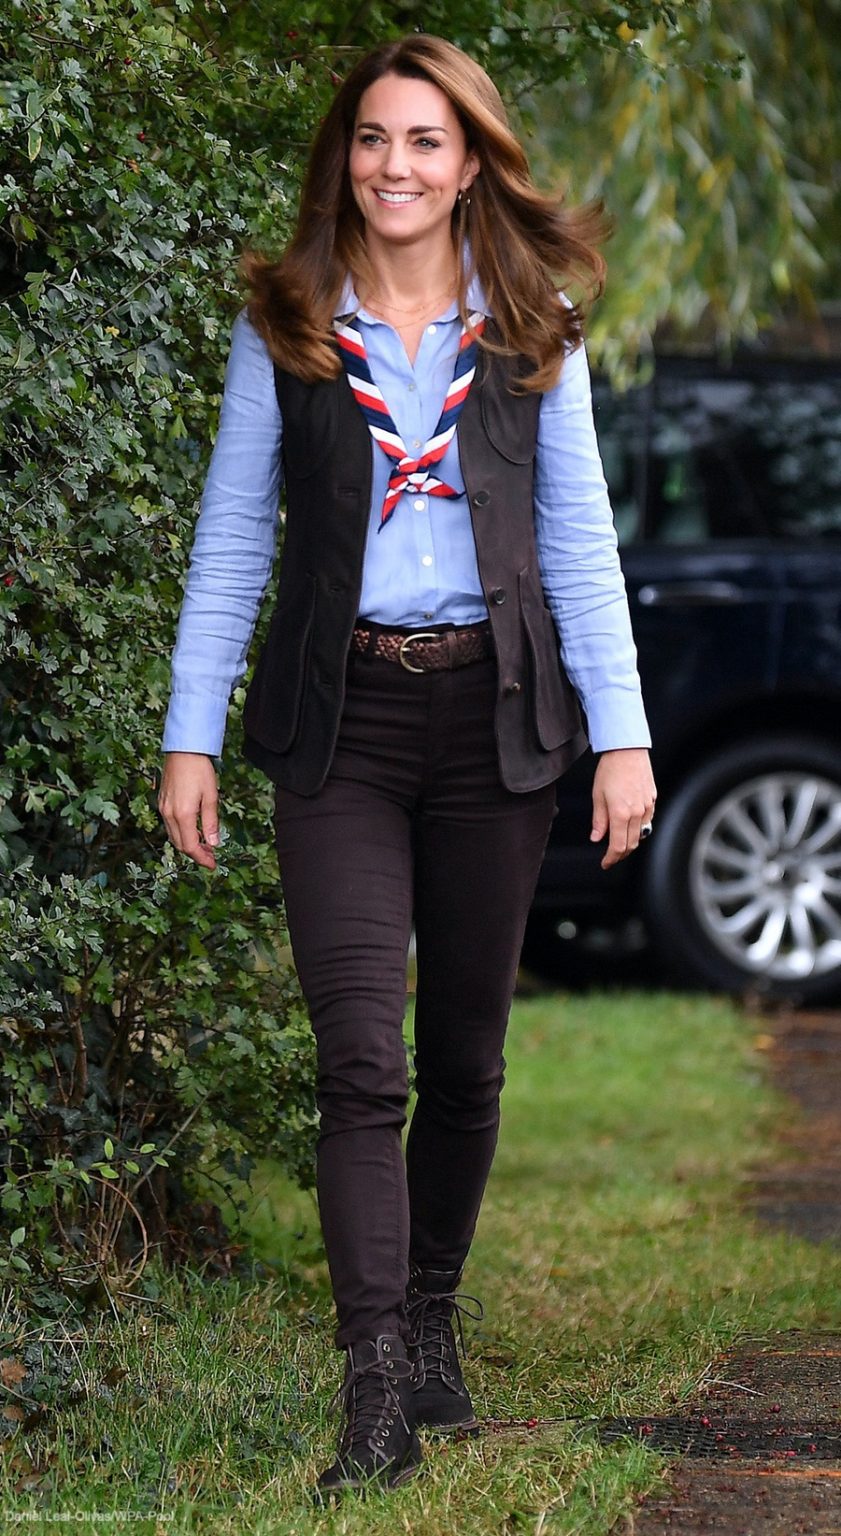 Kate Middleton in Outdoorsy Outfit for Visit with The Scouts